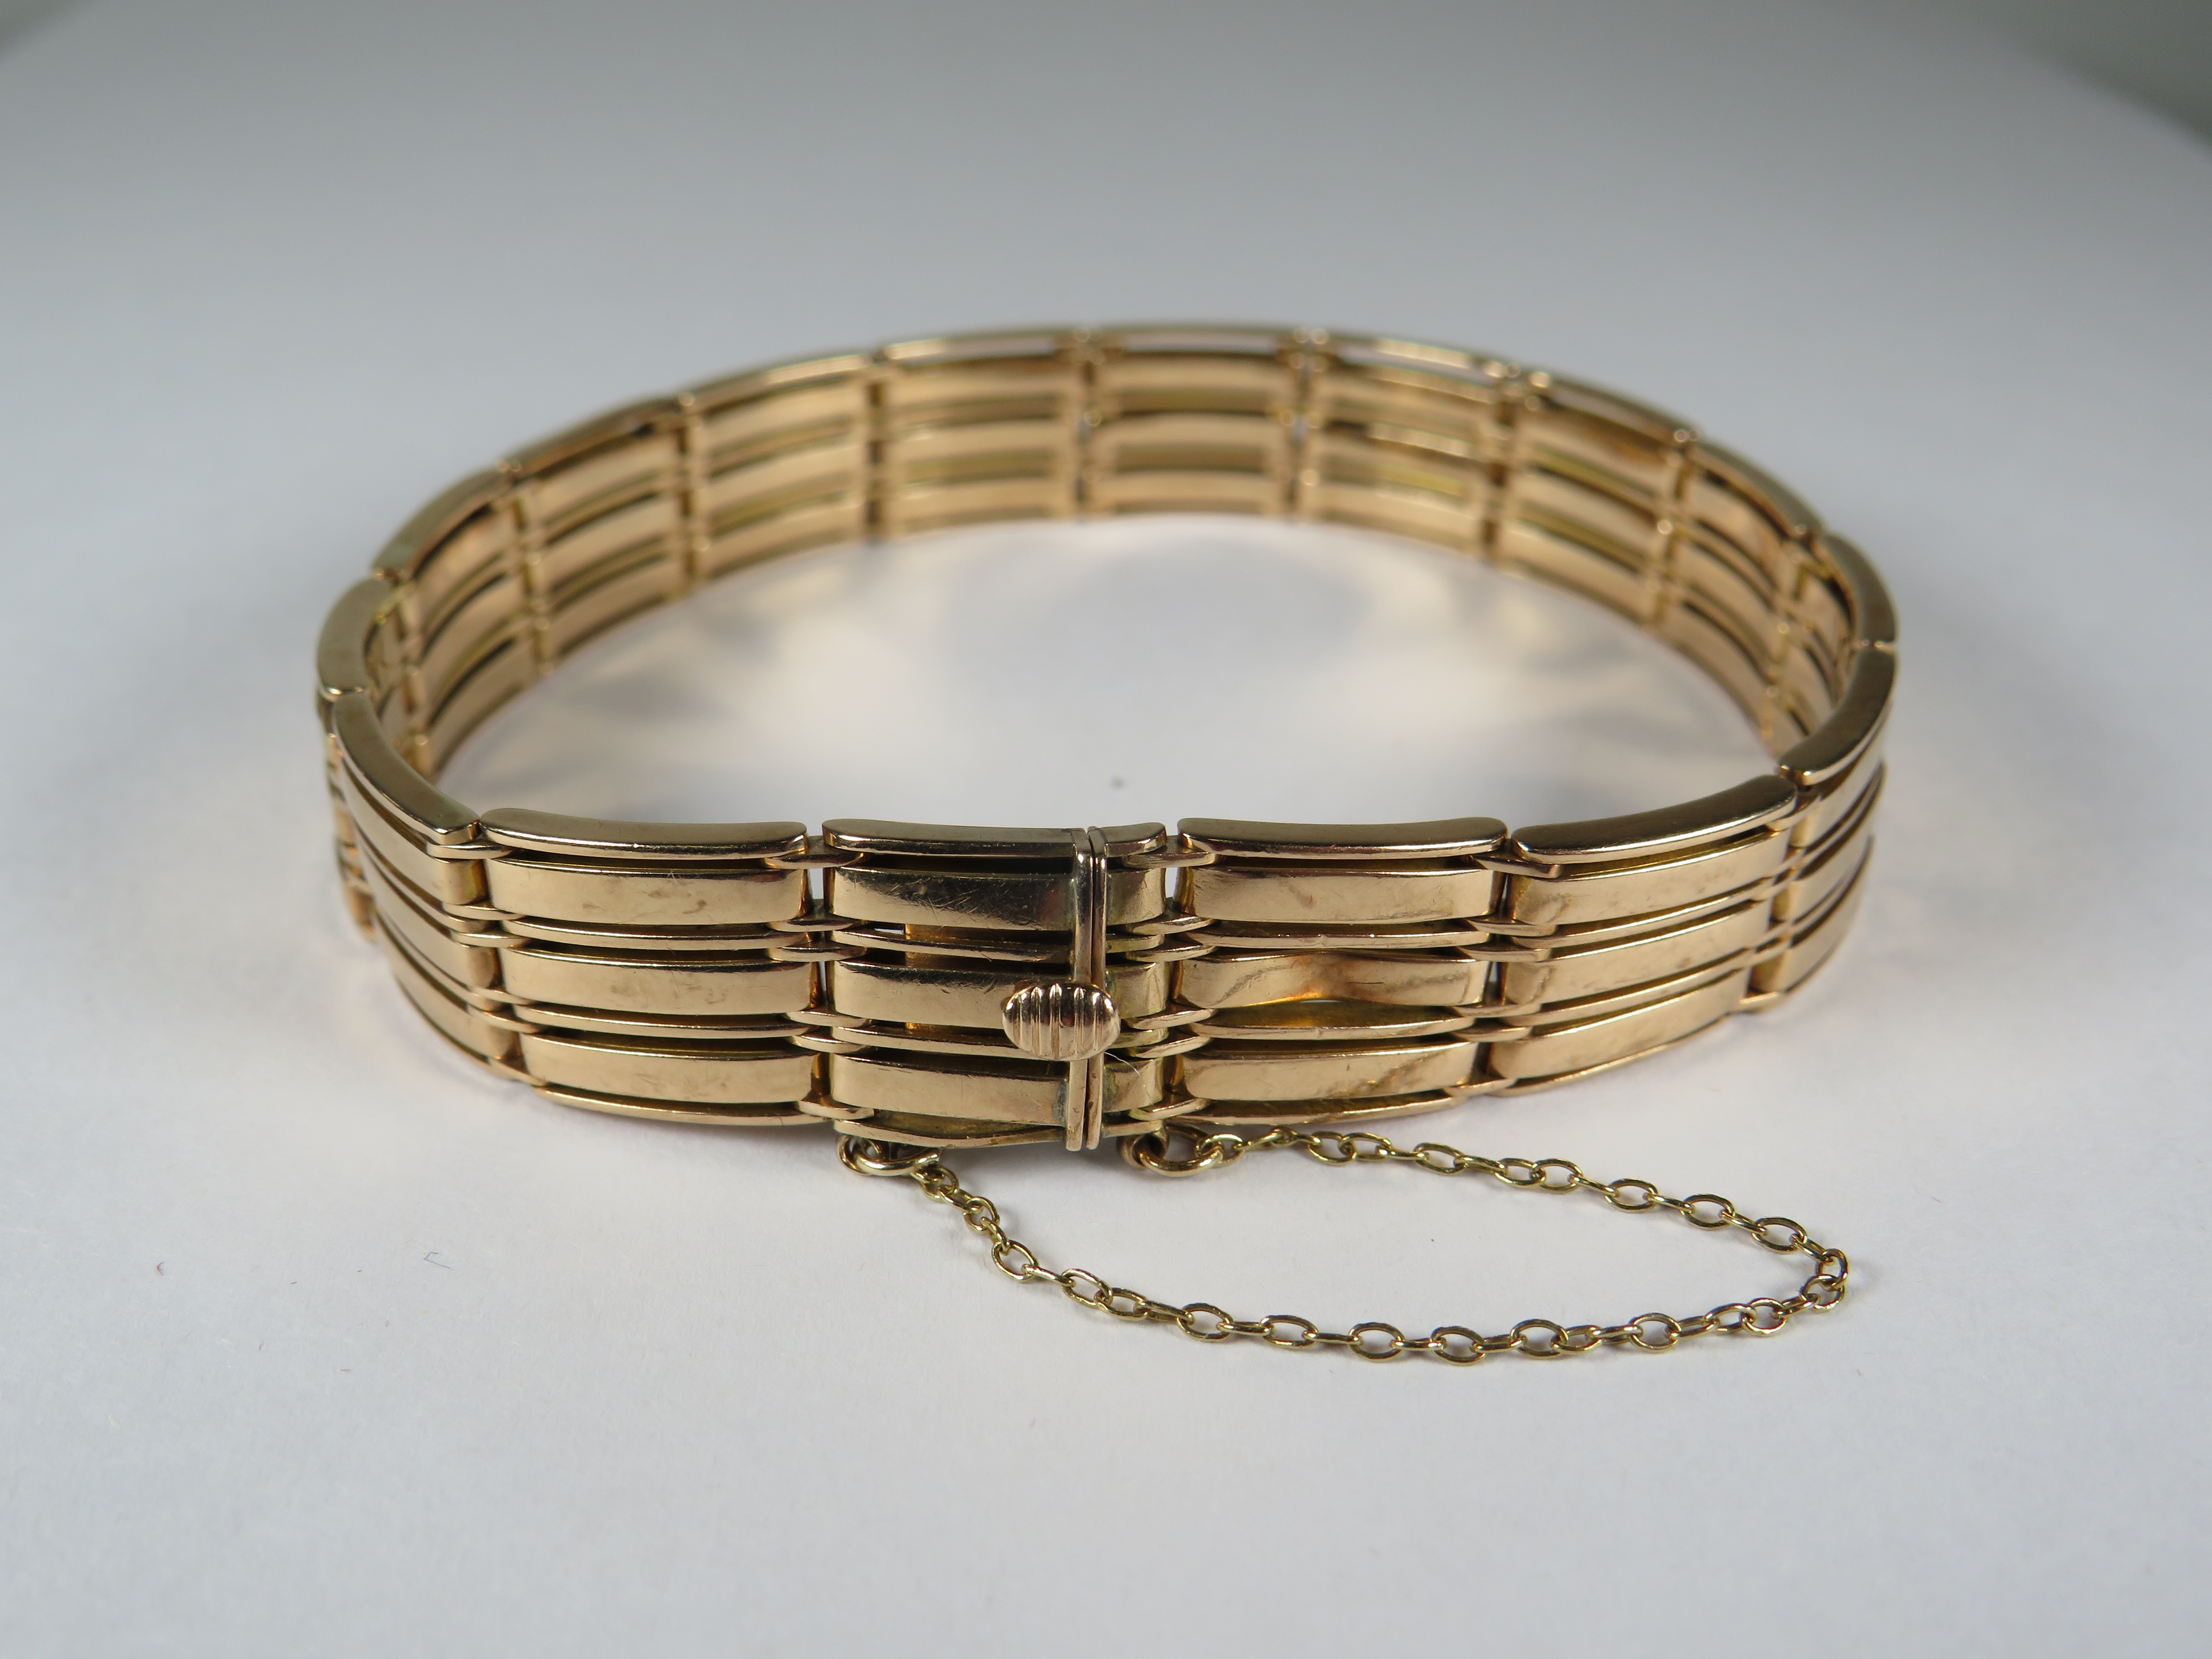 Vintage Three bar 9ct Yellow Gold Bracelet with Safety chain in excellent condition.  7.5 inches.  W